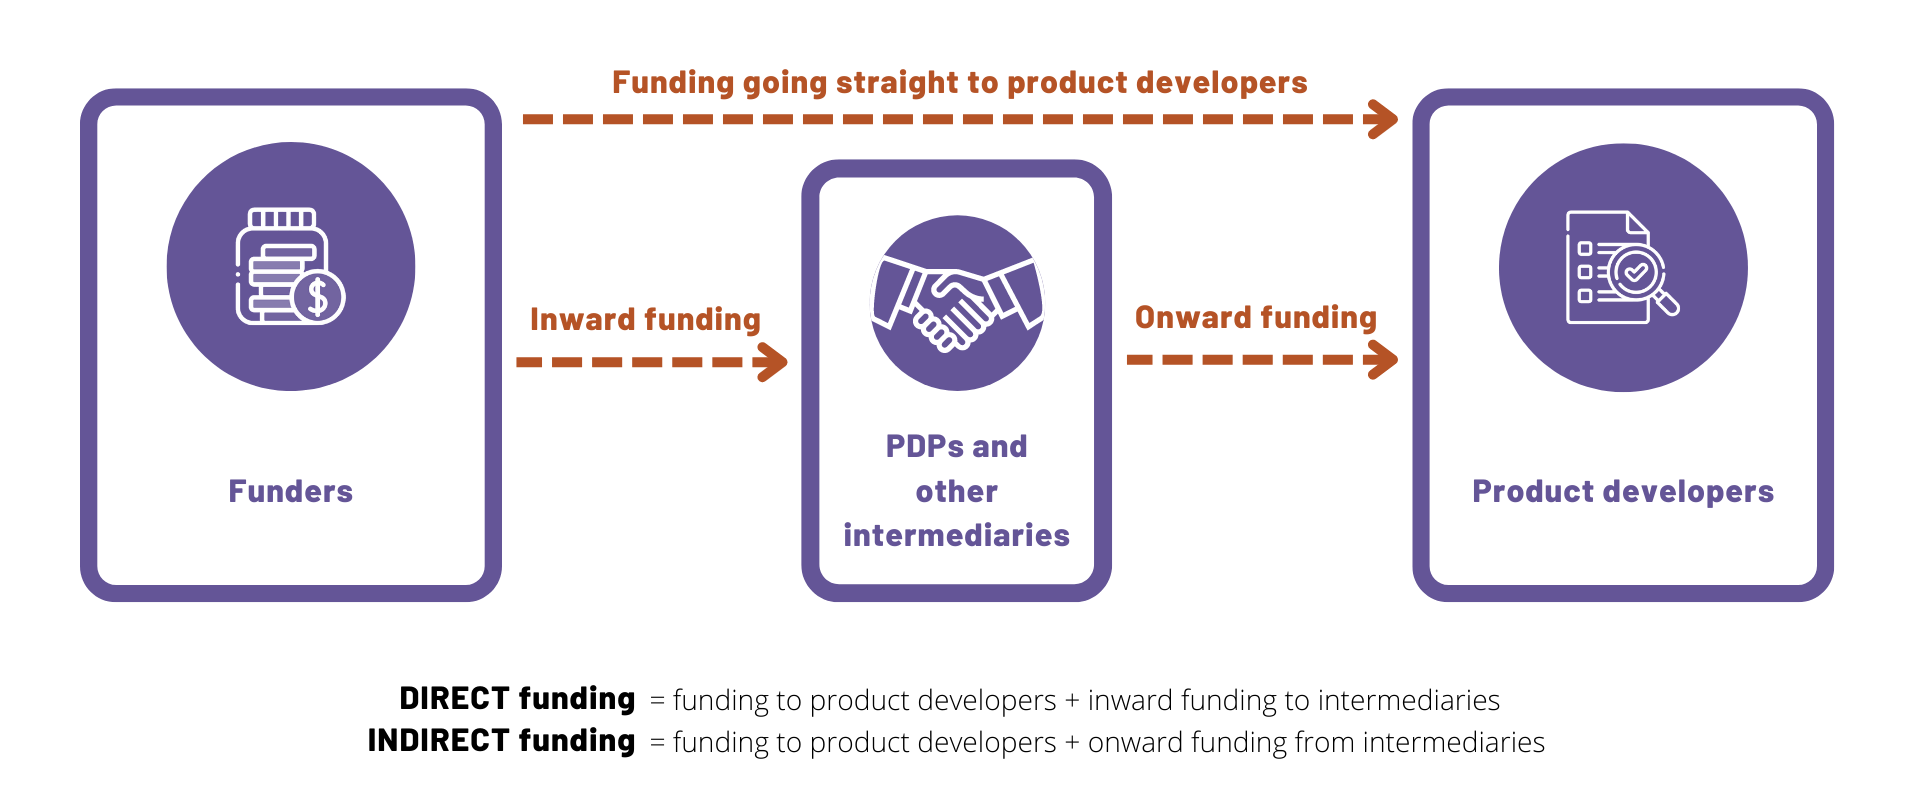 Diagram illustrating direct and indirect funding. Direct funding is funding to product developers + inward funding to intermediaries. Indirect funding is funding to product developers + onward funding to intermediaries